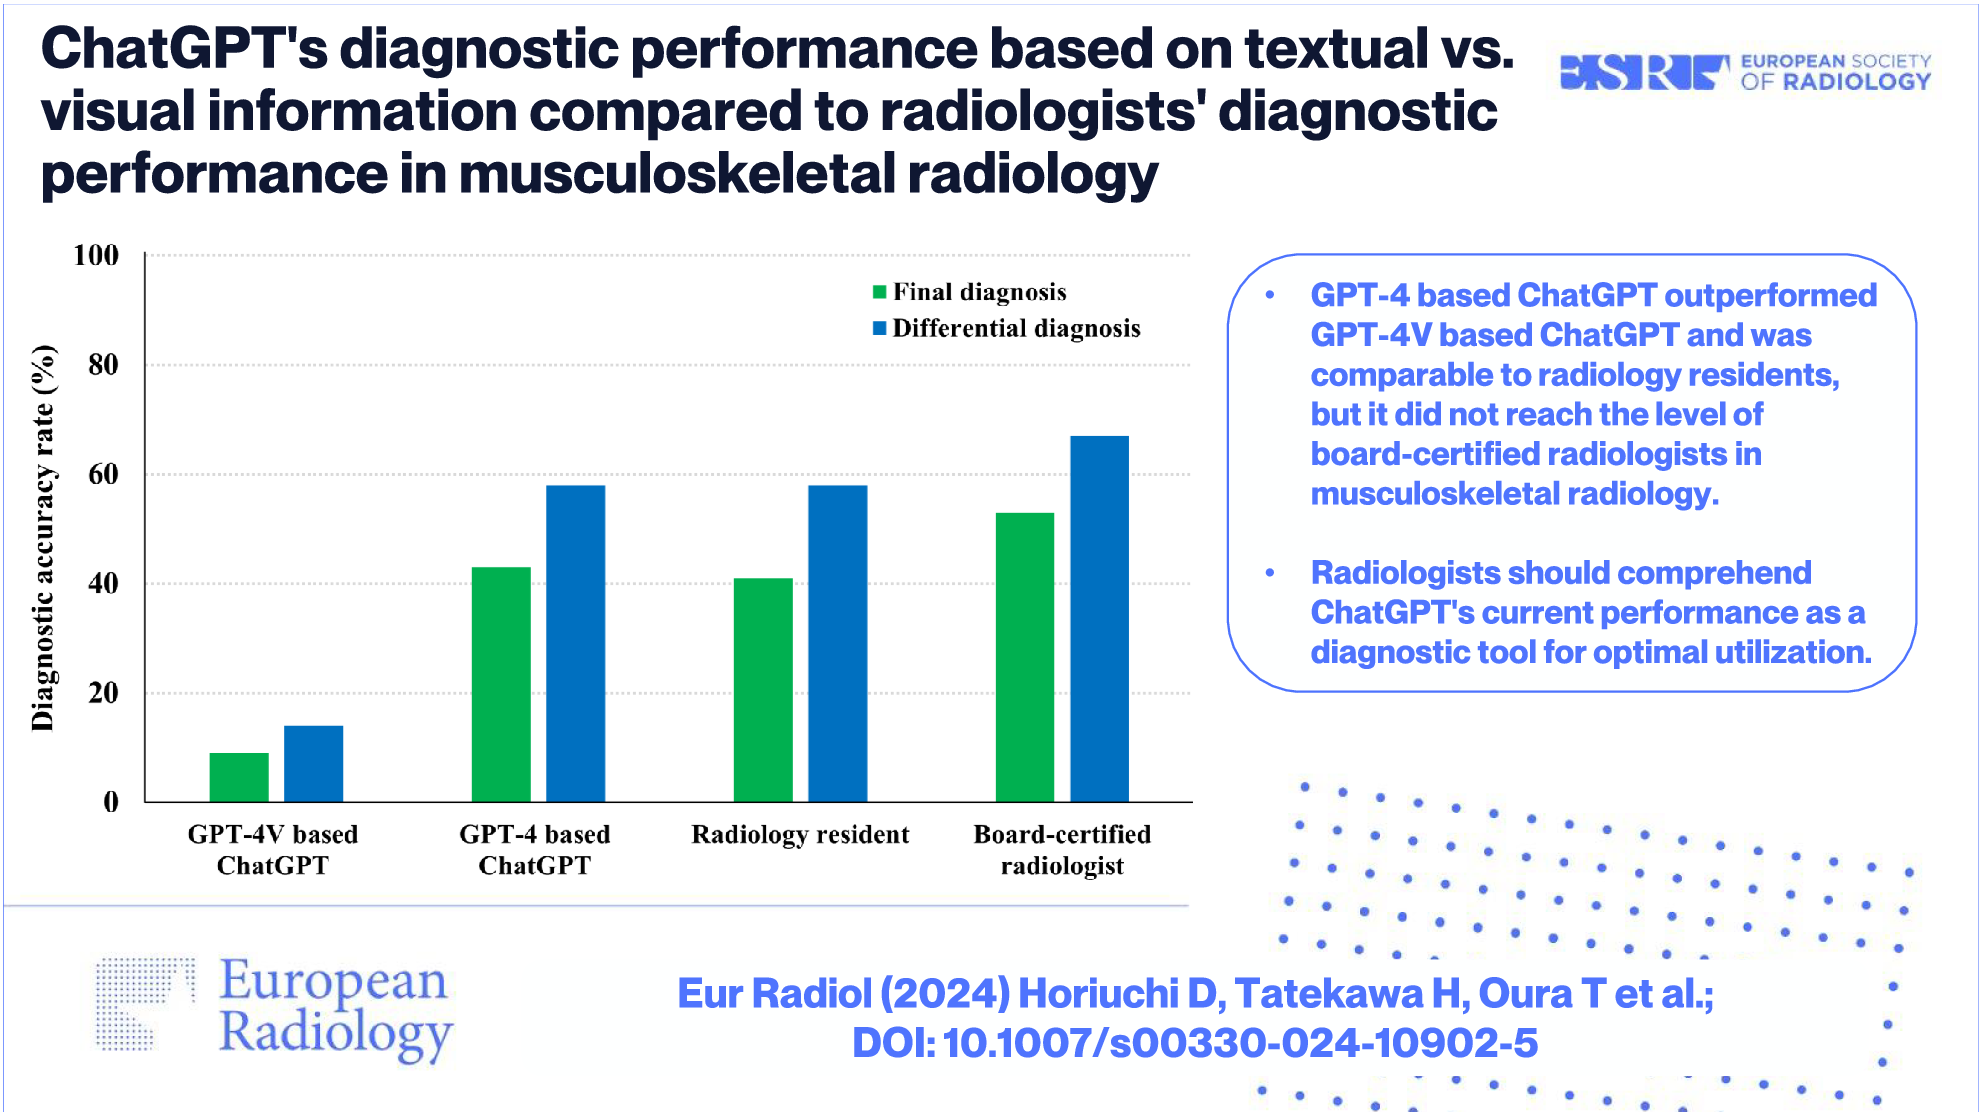 ChatGPT’s diagnostic performance based on textual vs. visual information compared to radiologists’ diagnostic performance in musculoskeletal radiology